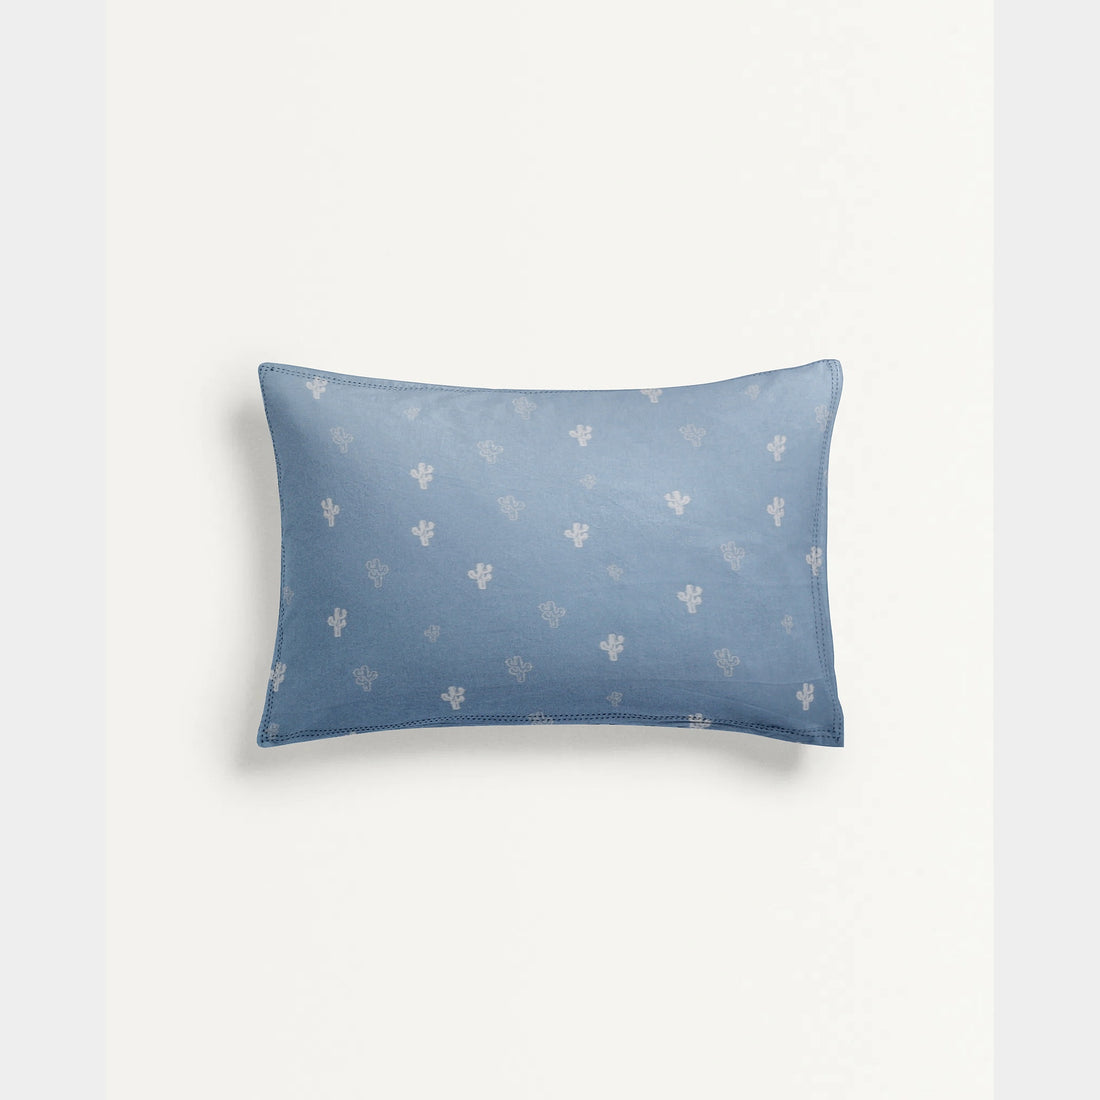 ‘Blue Cactus’ Organic Baby Pillow Cover